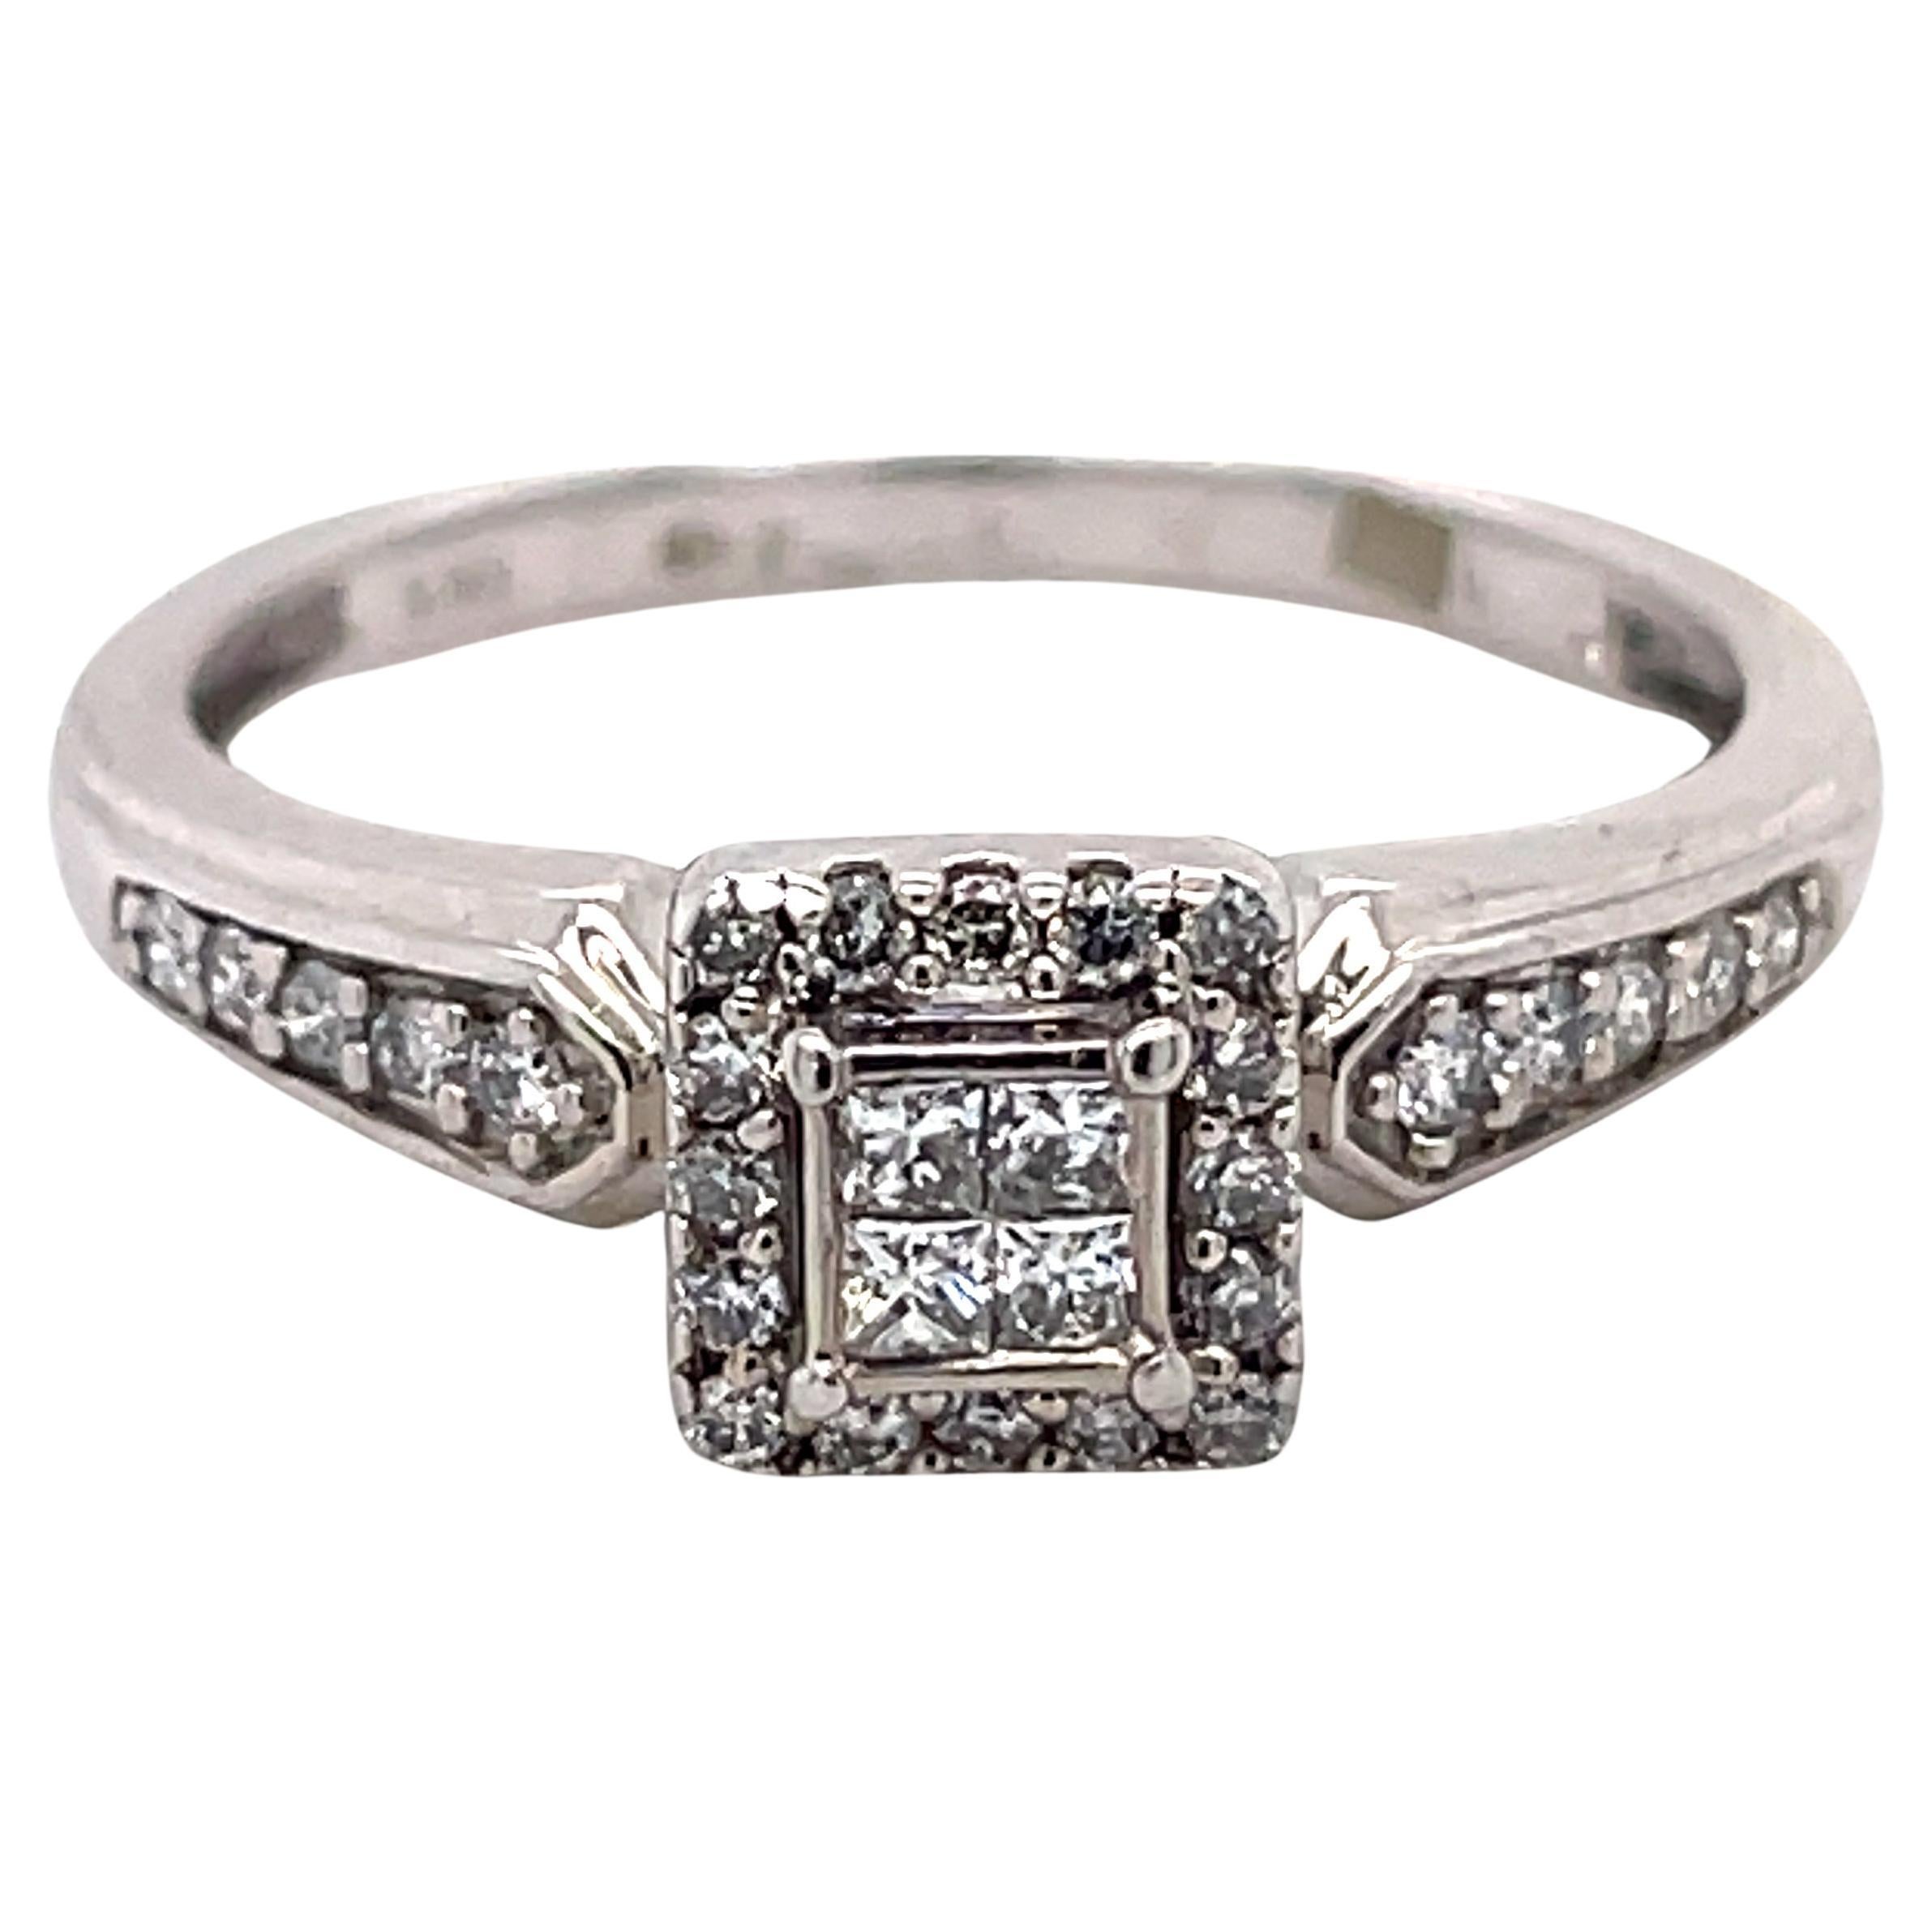 Vintage princess cut ring, dainty ring, 10K, 0.17ct diamonds, gold promise ring For Sale